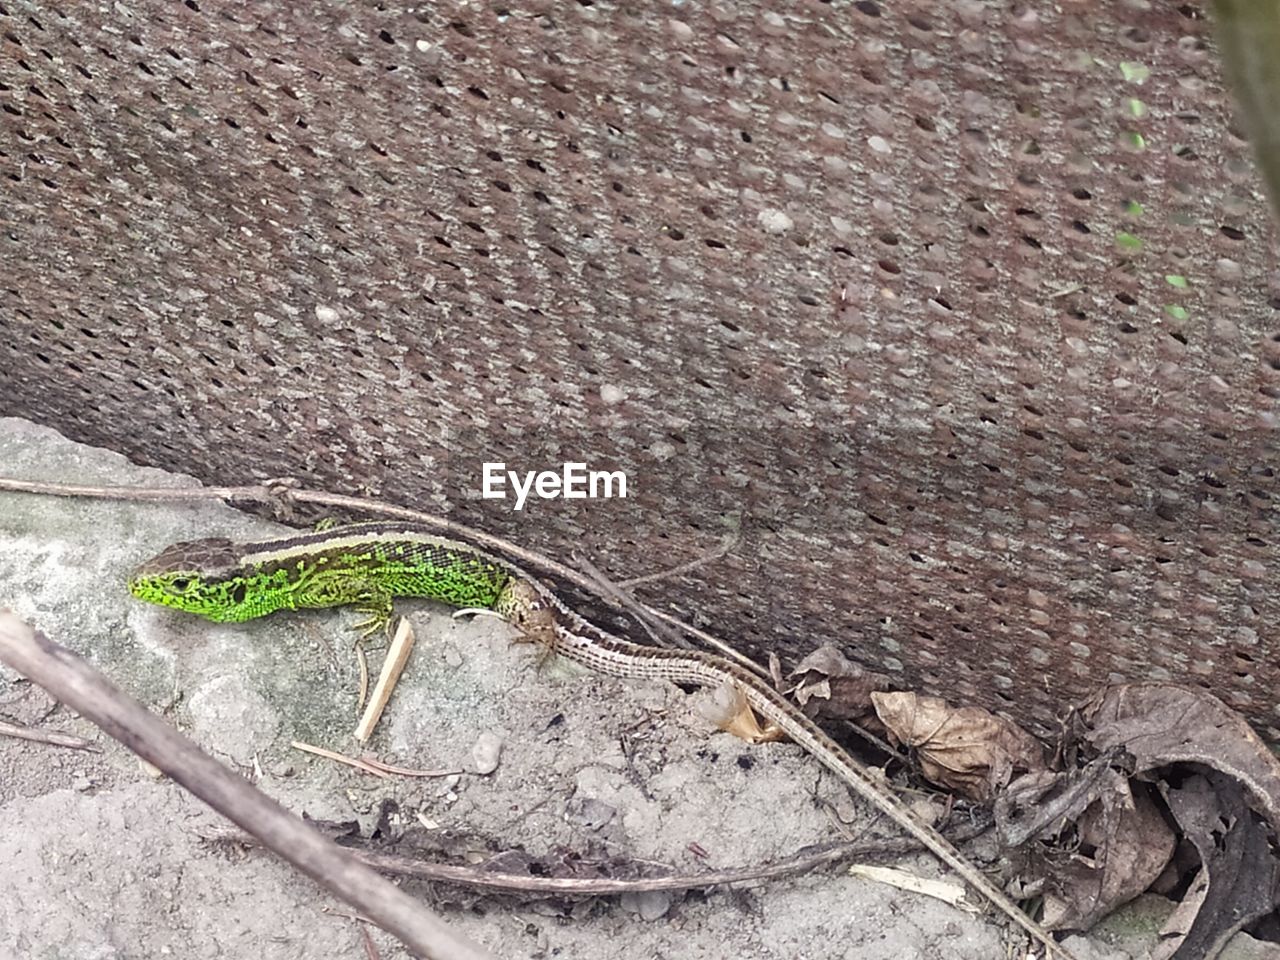 HIGH ANGLE VIEW OF A LIZARD ON A FIELD